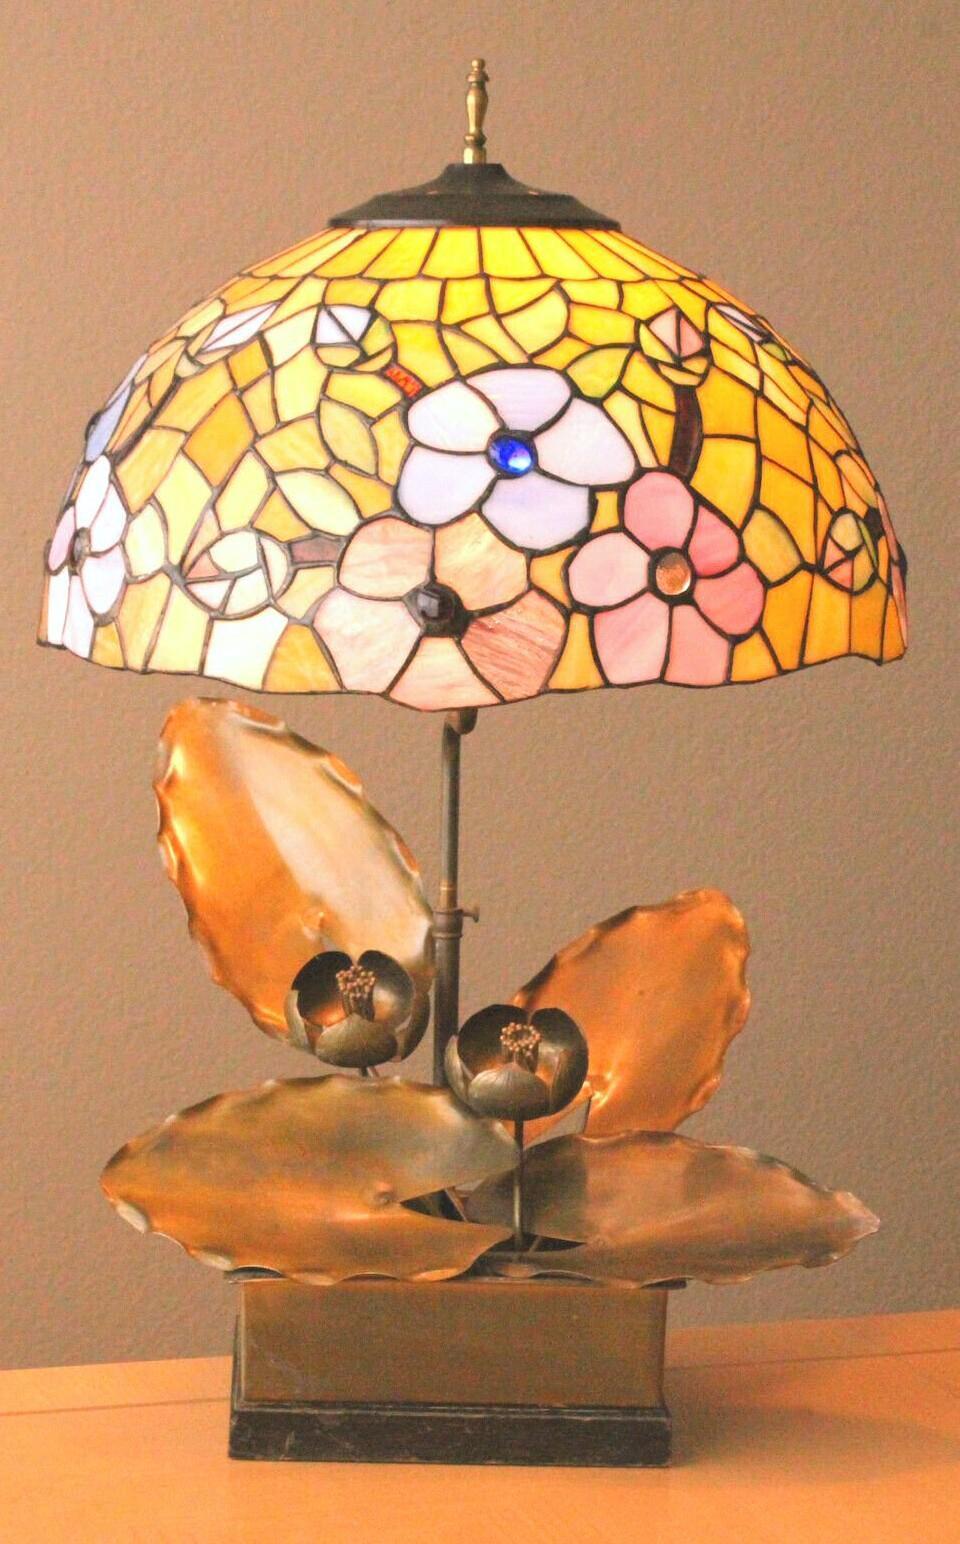 Hand-Crafted Magificent 1920s Art Nouveau Metal Sculptural Lotus Lamp. Camed Art Glass For Sale